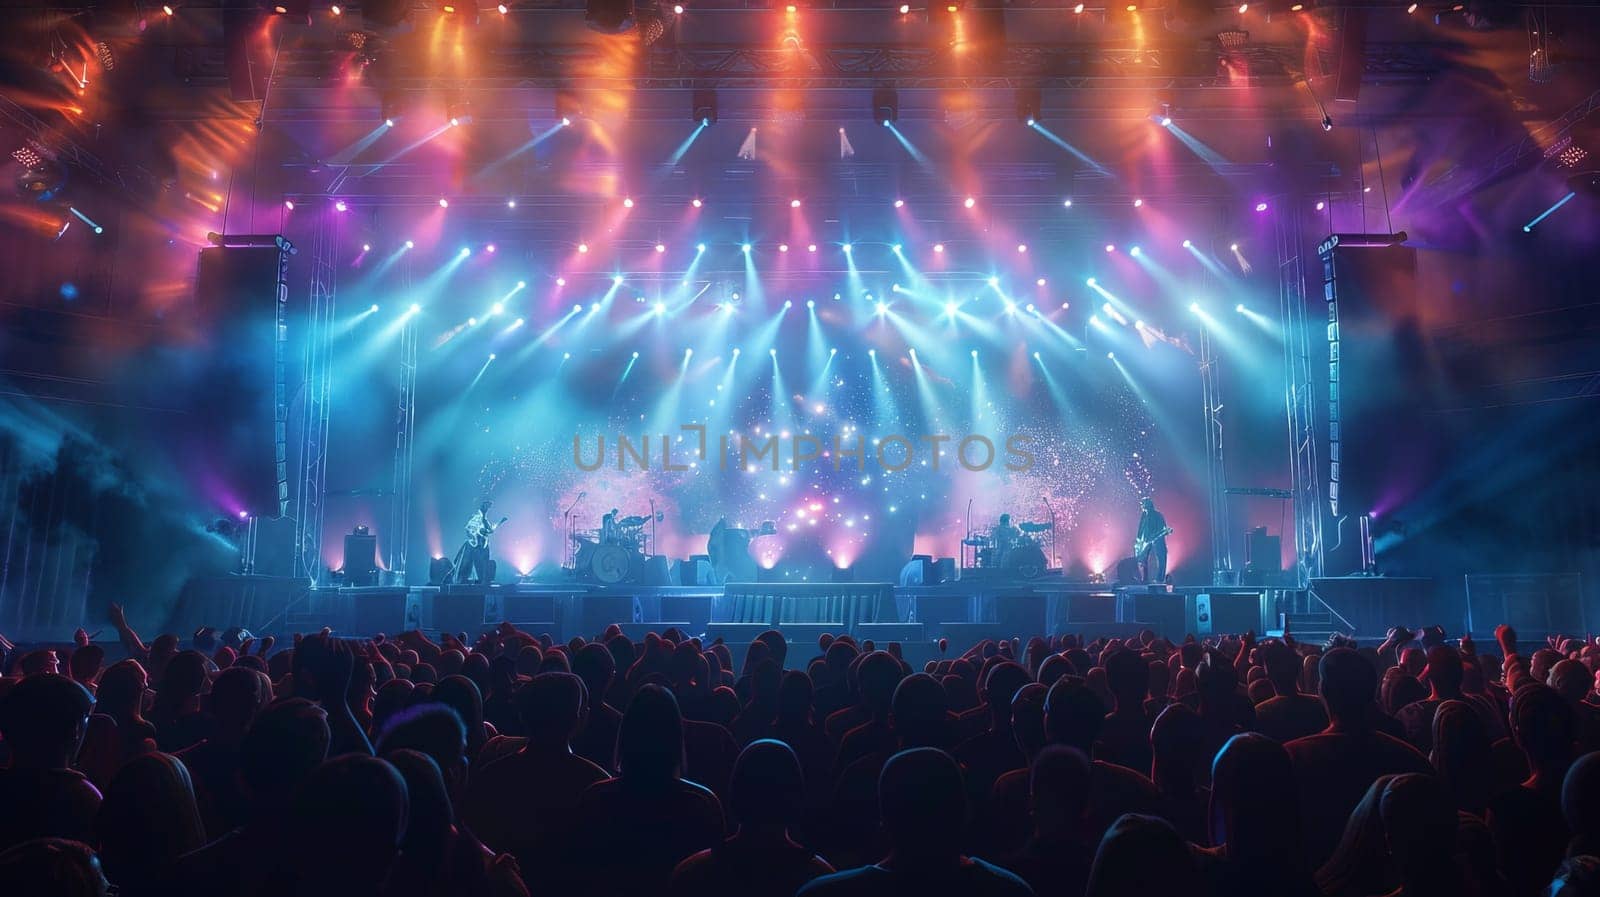 A large crowd of people are watching a concert with bright lights and a stage. Scene is energetic and exciting